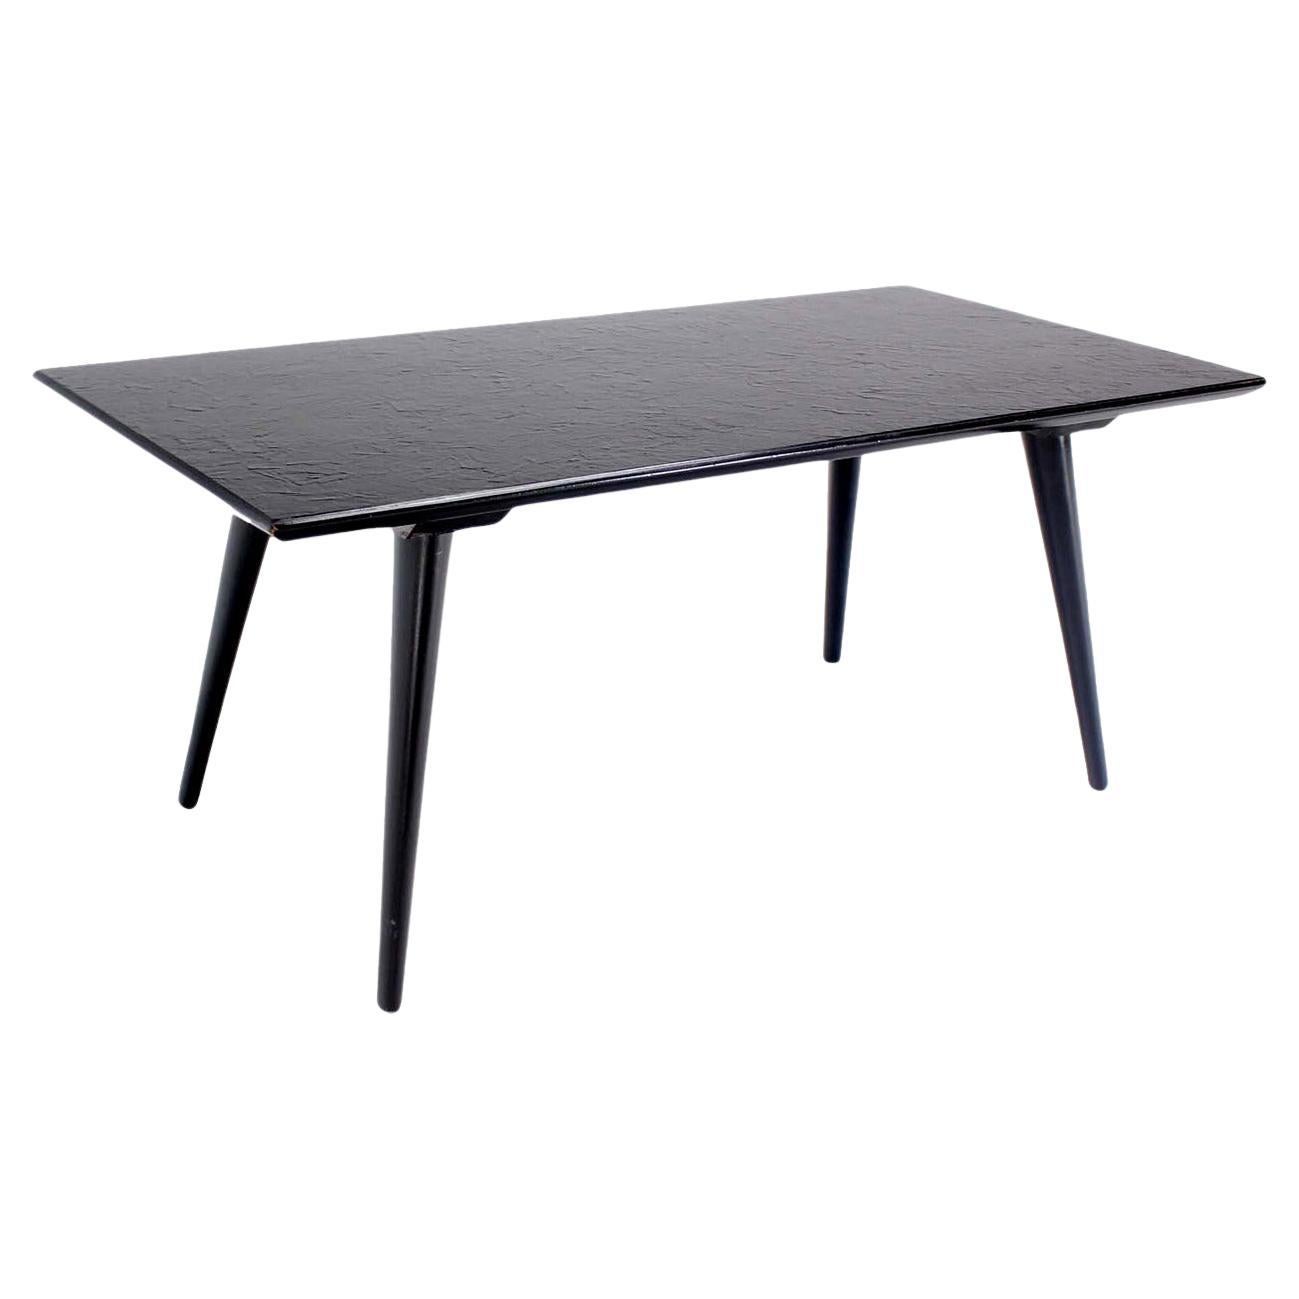 Paul McCobb Mid-Century Modern Black lacquer Slate Like Top Coffee Table MINT! For Sale